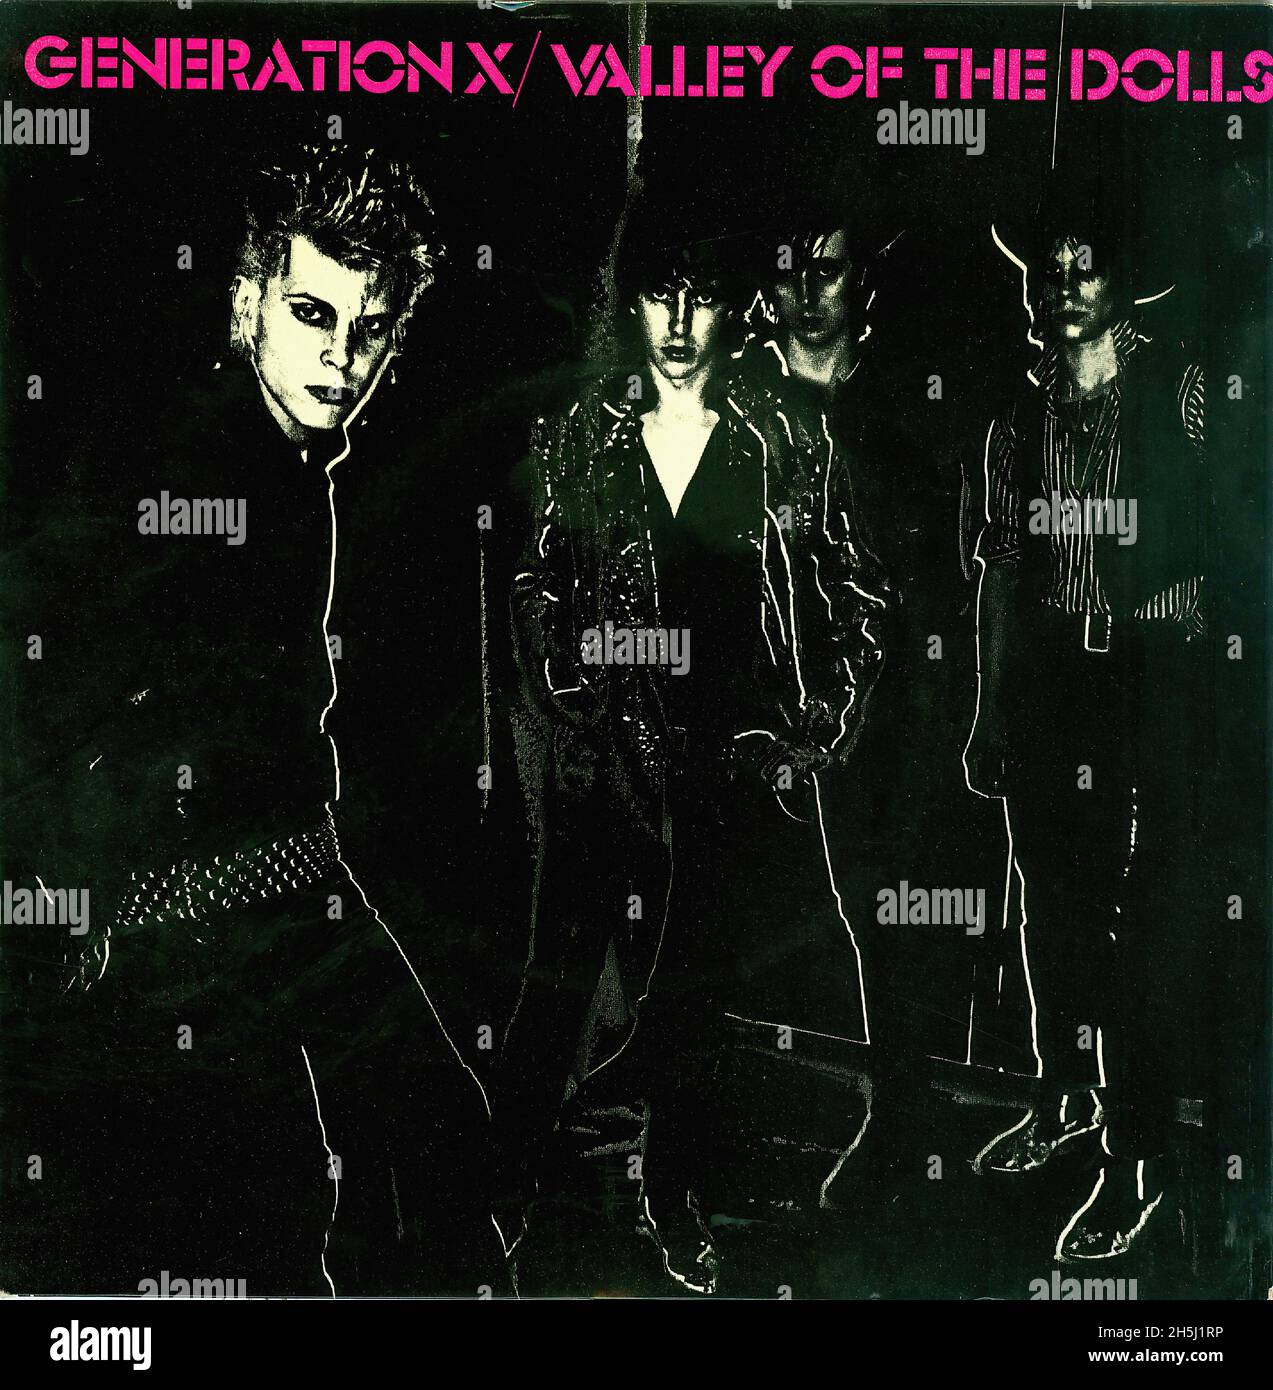 Vintage single record cover - Generation X - Valley Of The Dolls - UK - 1979 02 Stock Photo